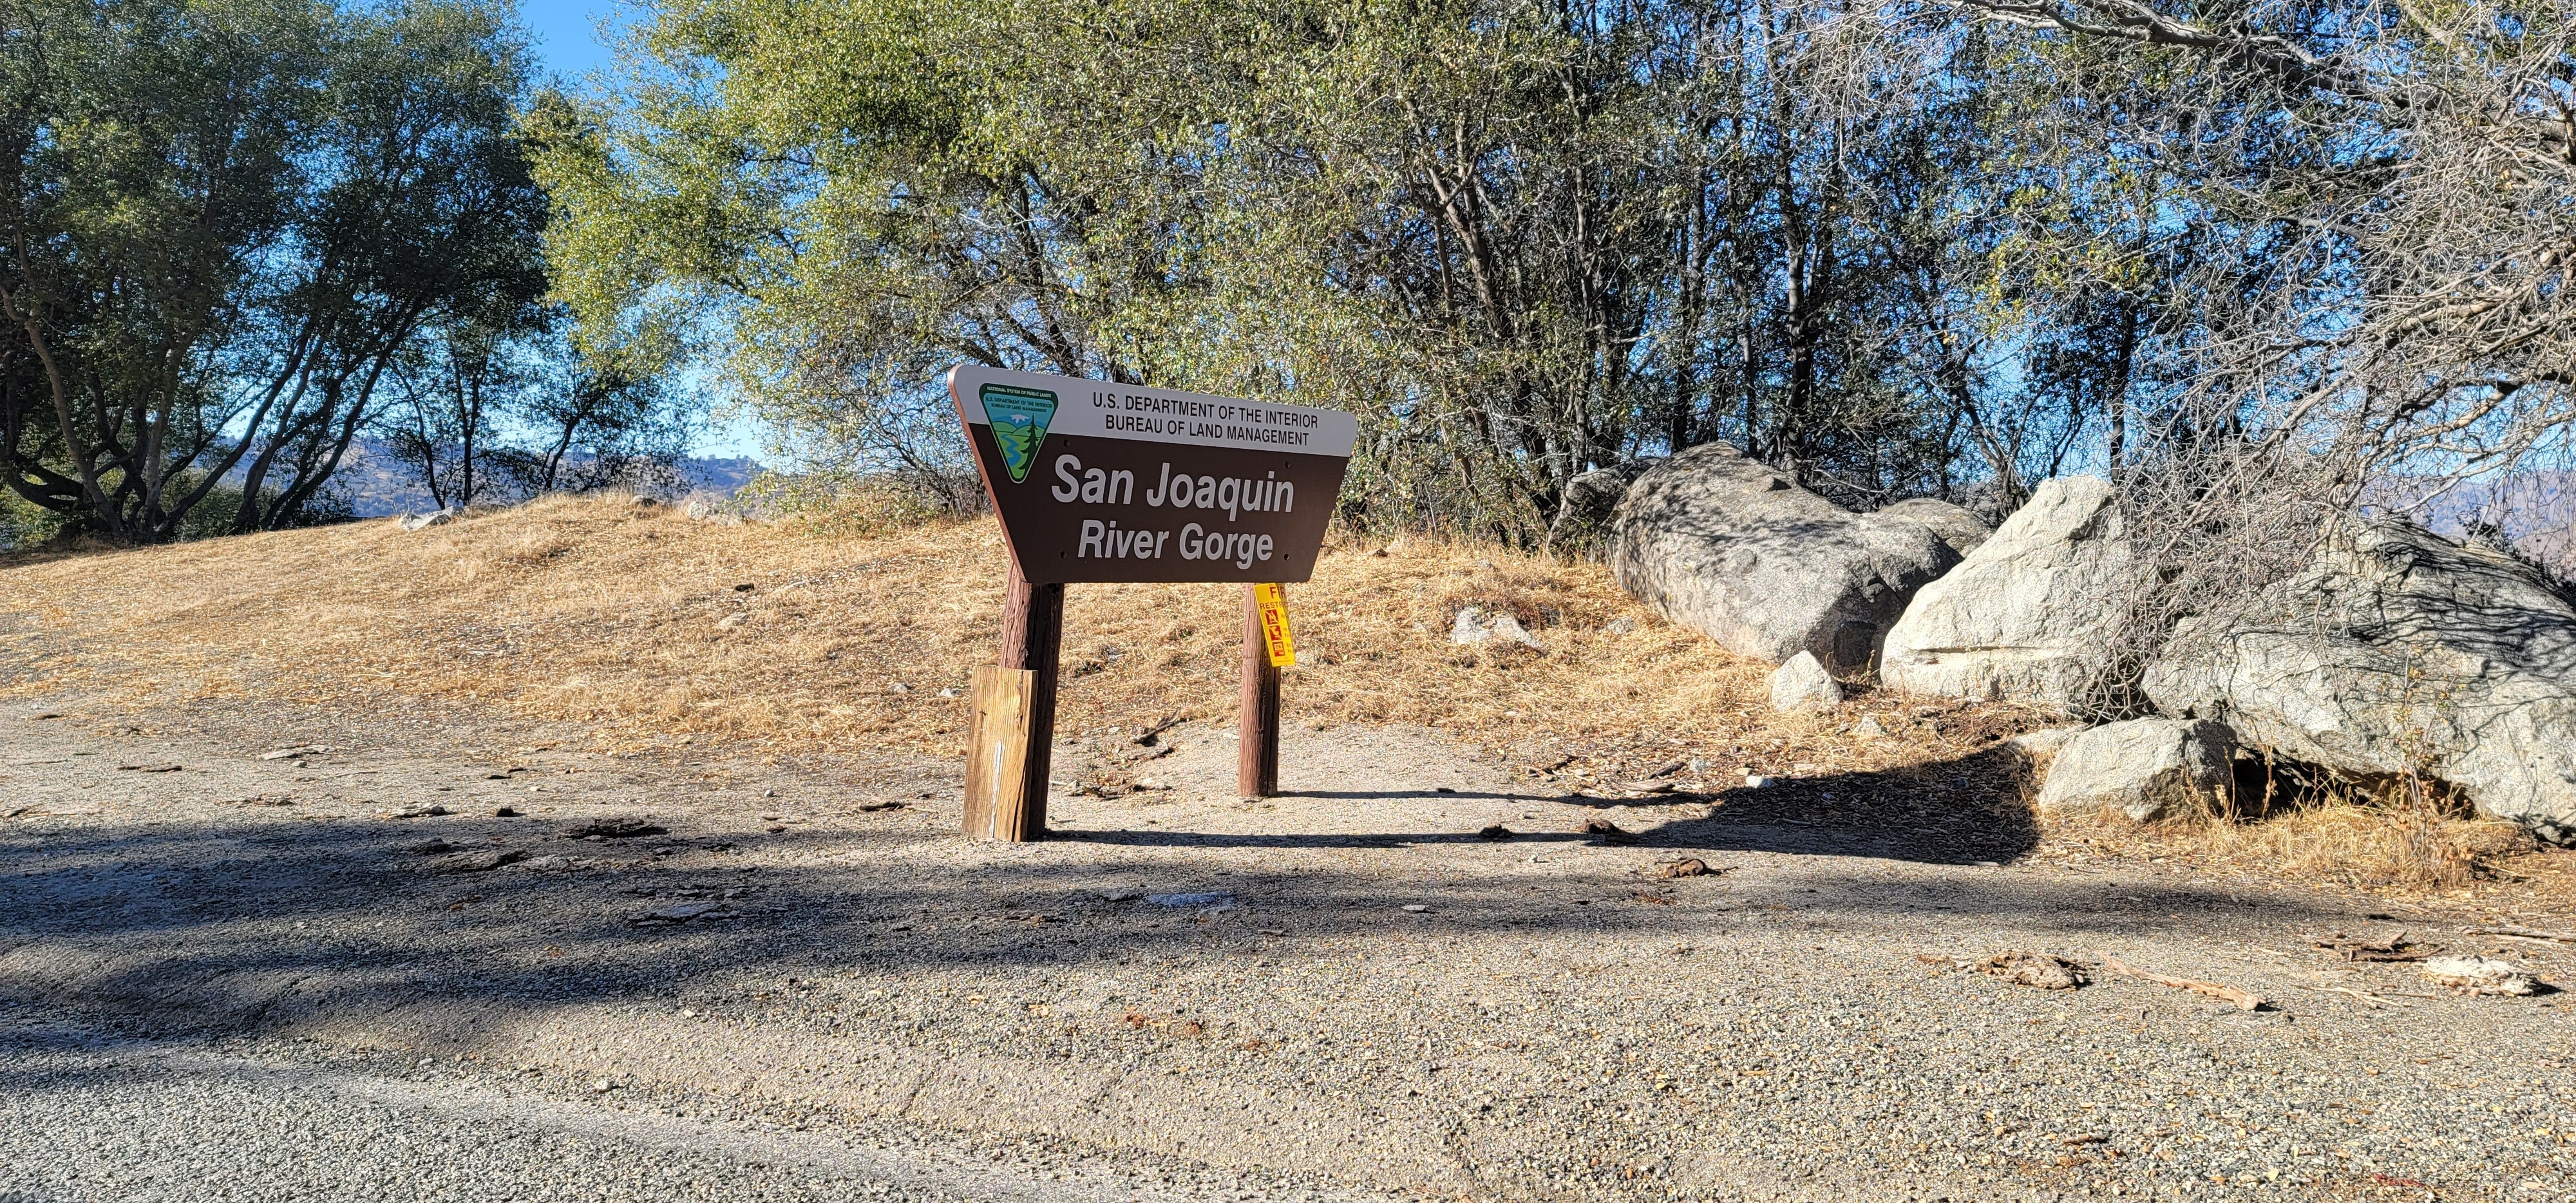 Camper submitted image from San Joaquin River Gorge - 2